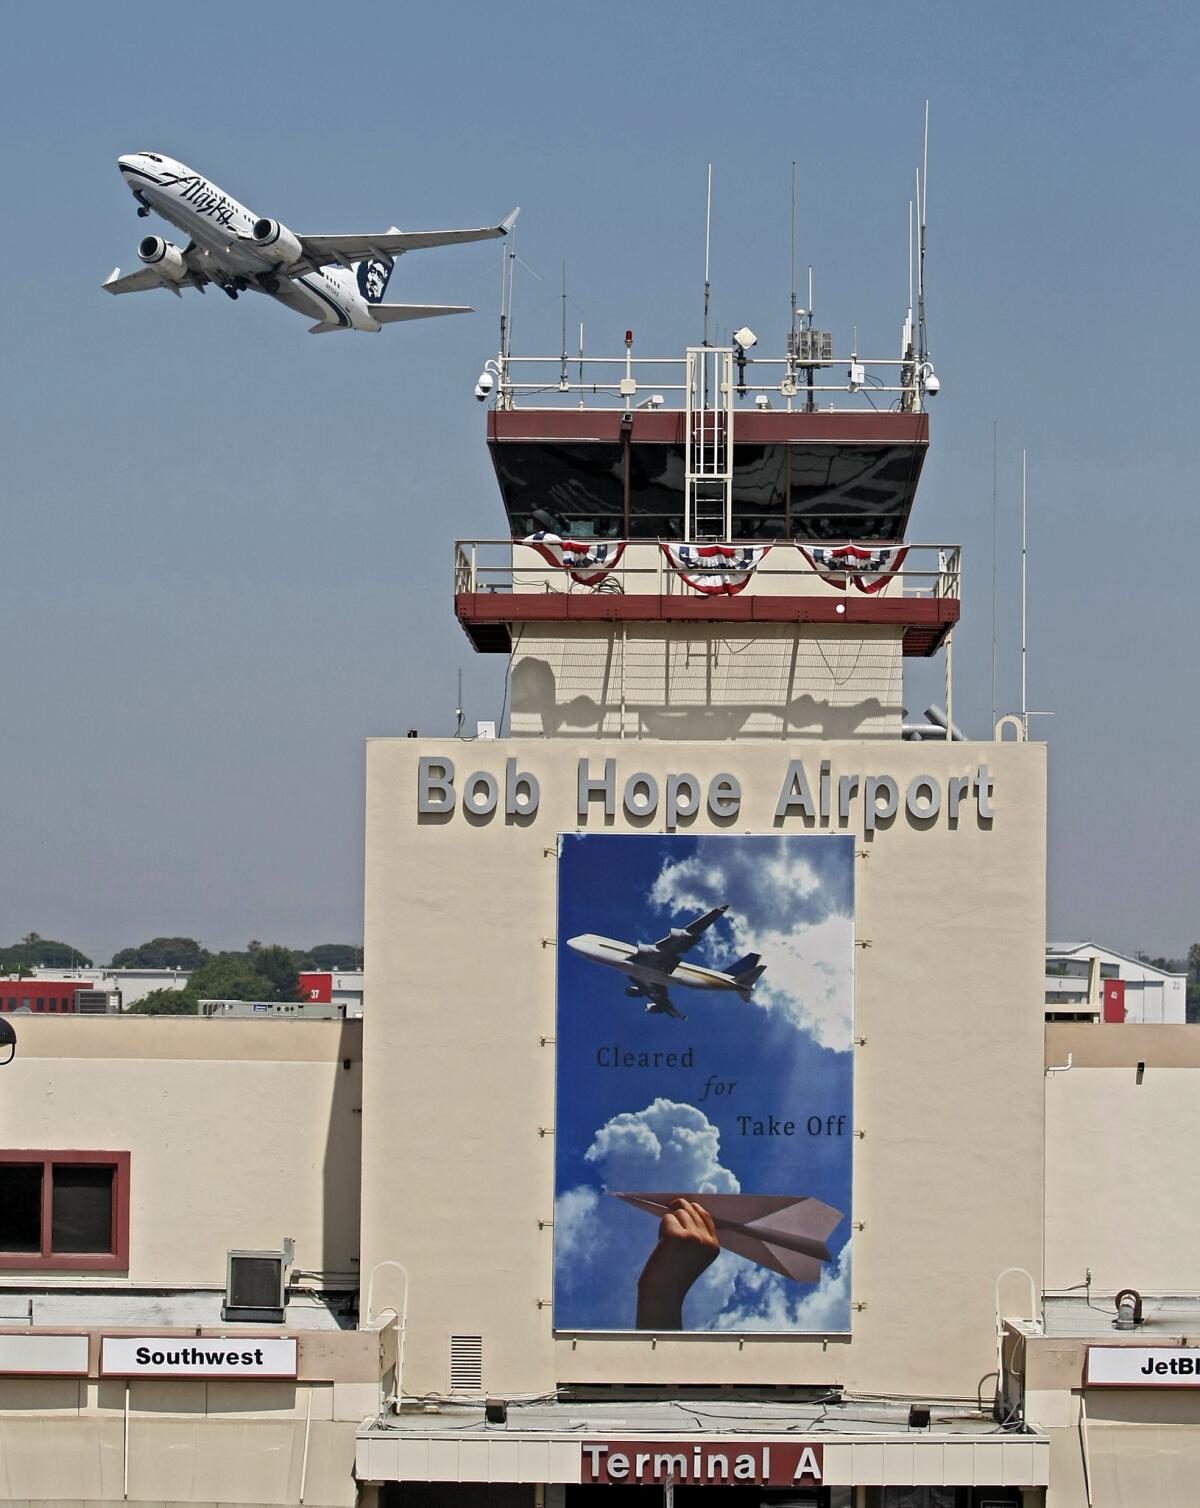 An airplane takes off from the Bob Hope Airport in Burbank on Tuesday, August 6, 2013.